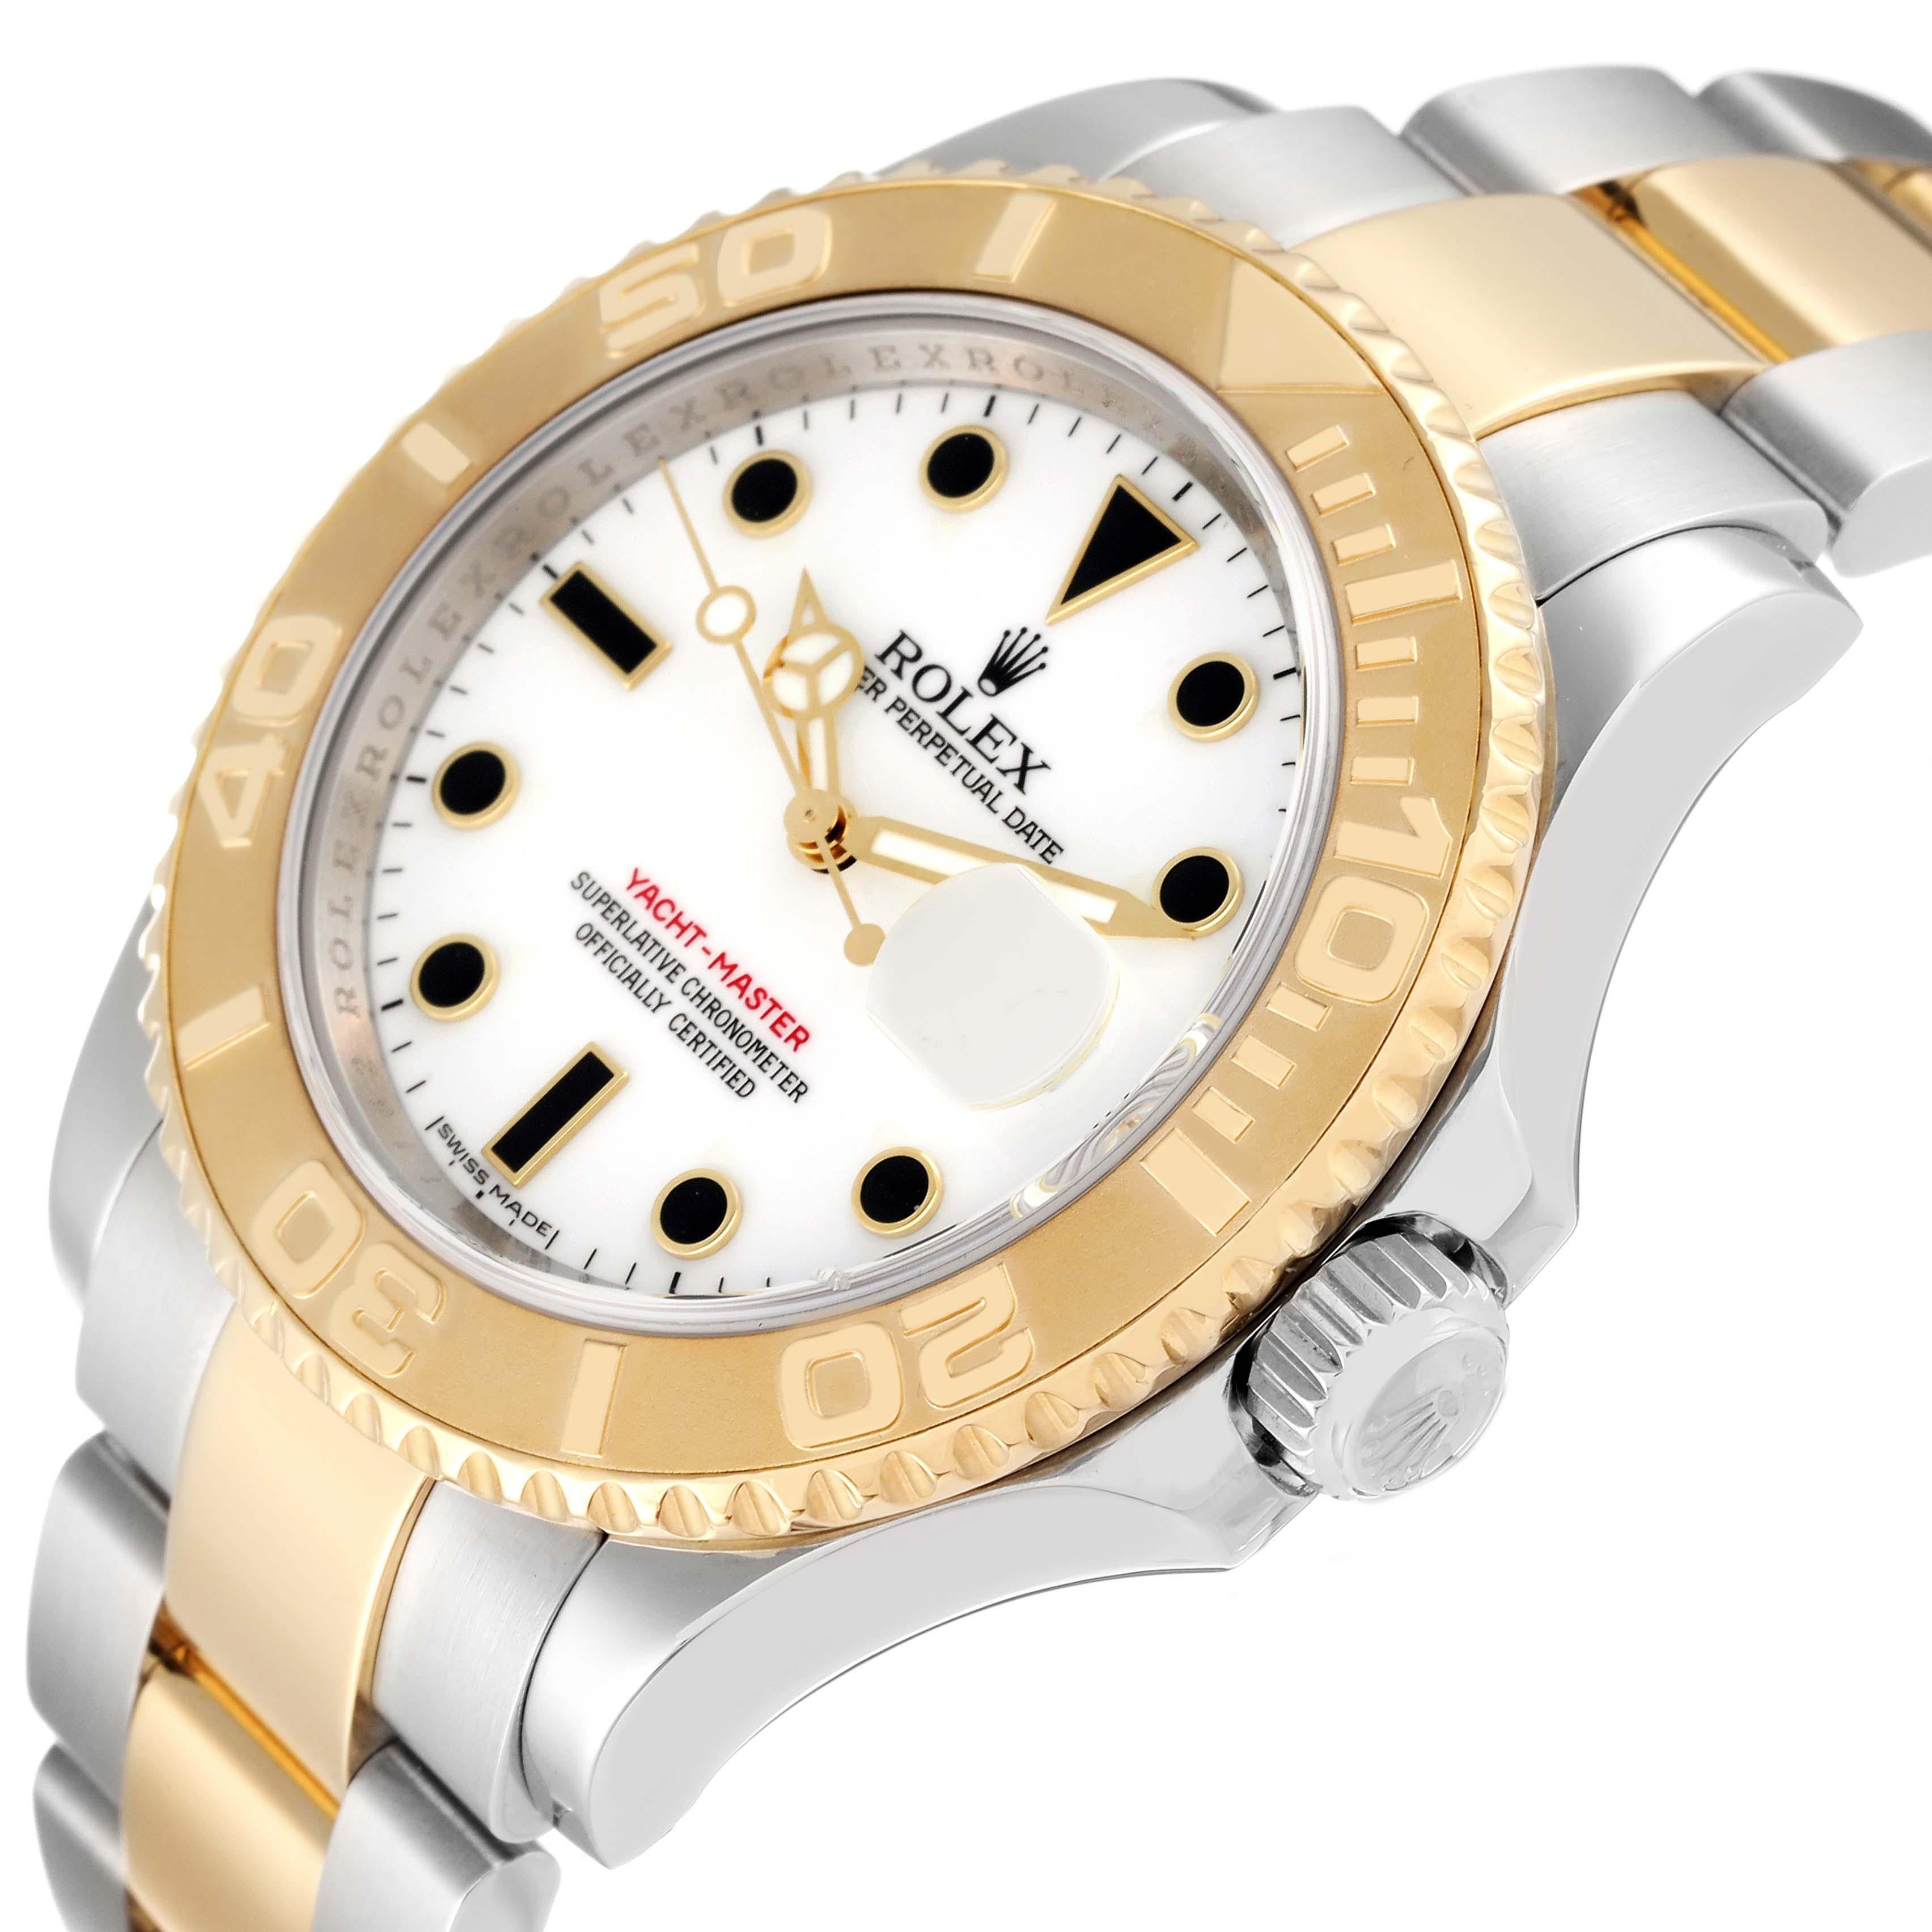 Rolex Yachtmaster Steel Yellow Gold White Dial Mens Watch 16623 Box Card 1